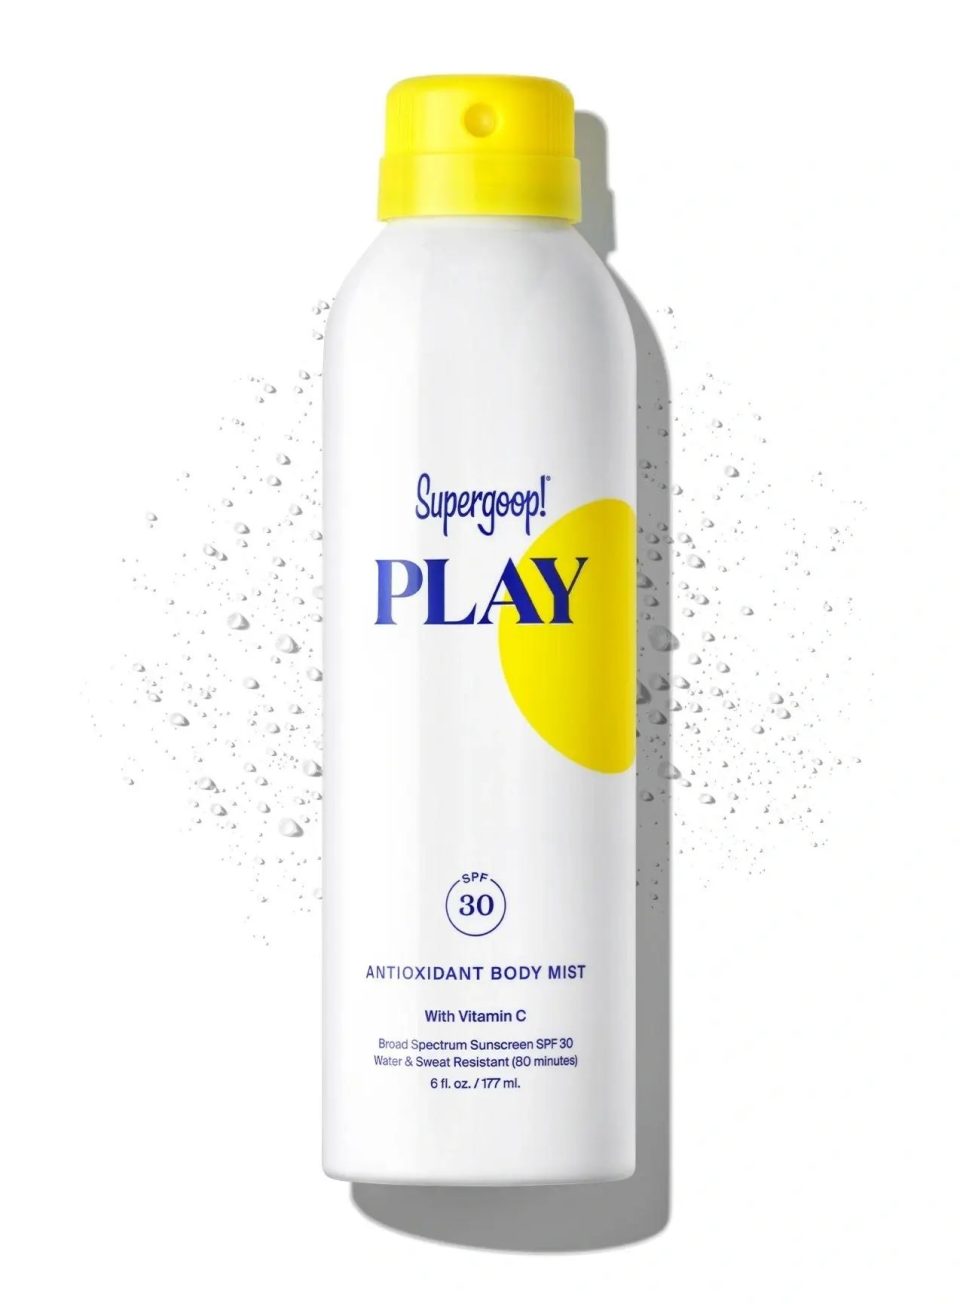 supergoop-play-antioxidant-body-mist-spf-30-with-vitamin-c-pack-and-texture